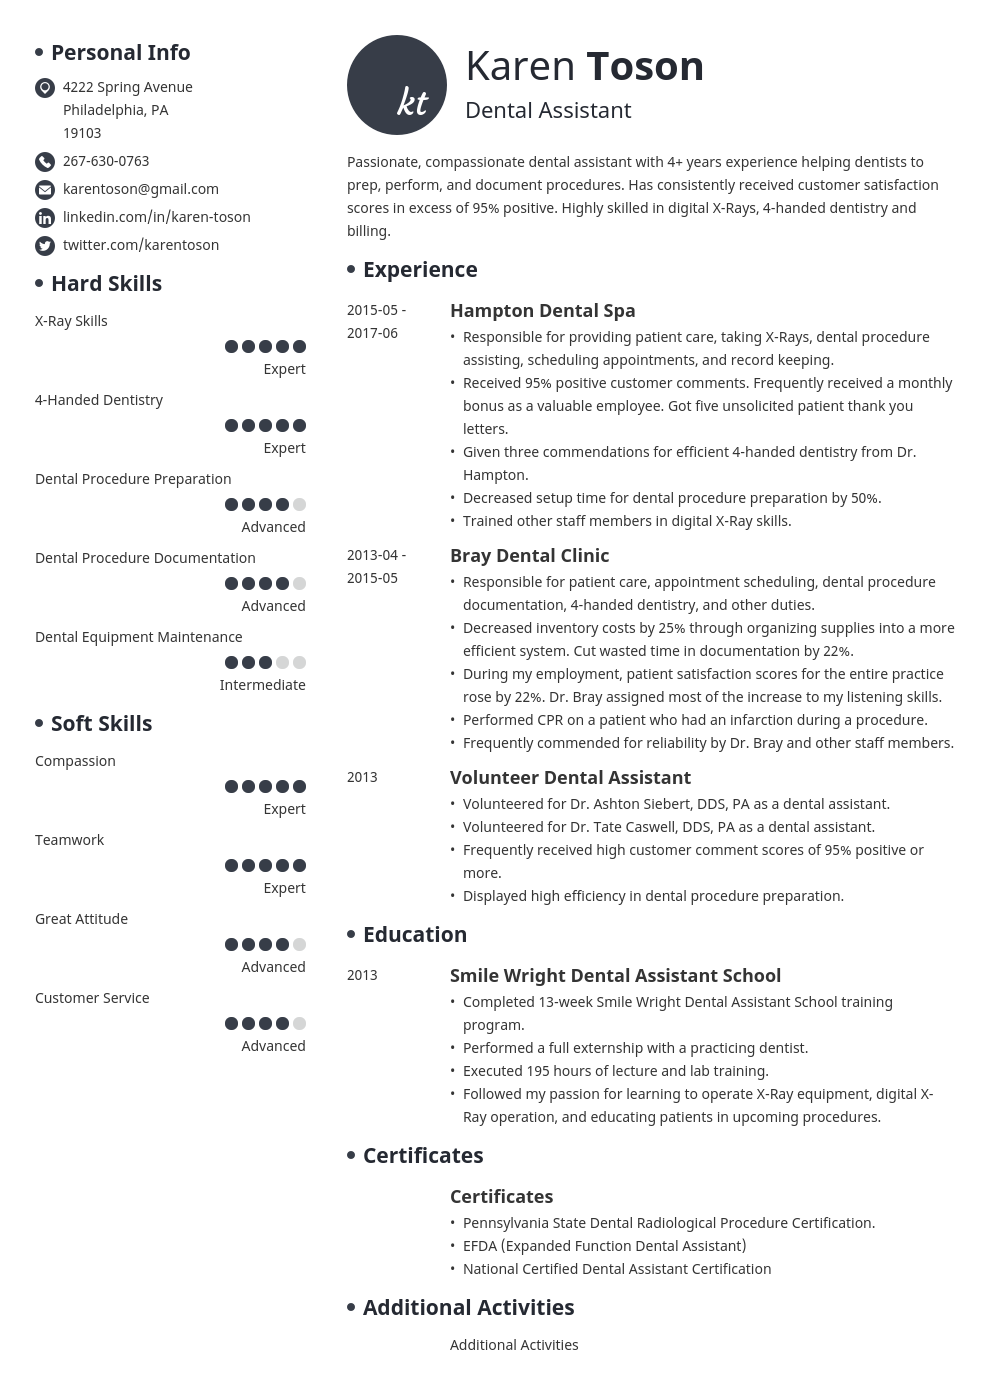 15 One Page Resume Templates To Fill in Download